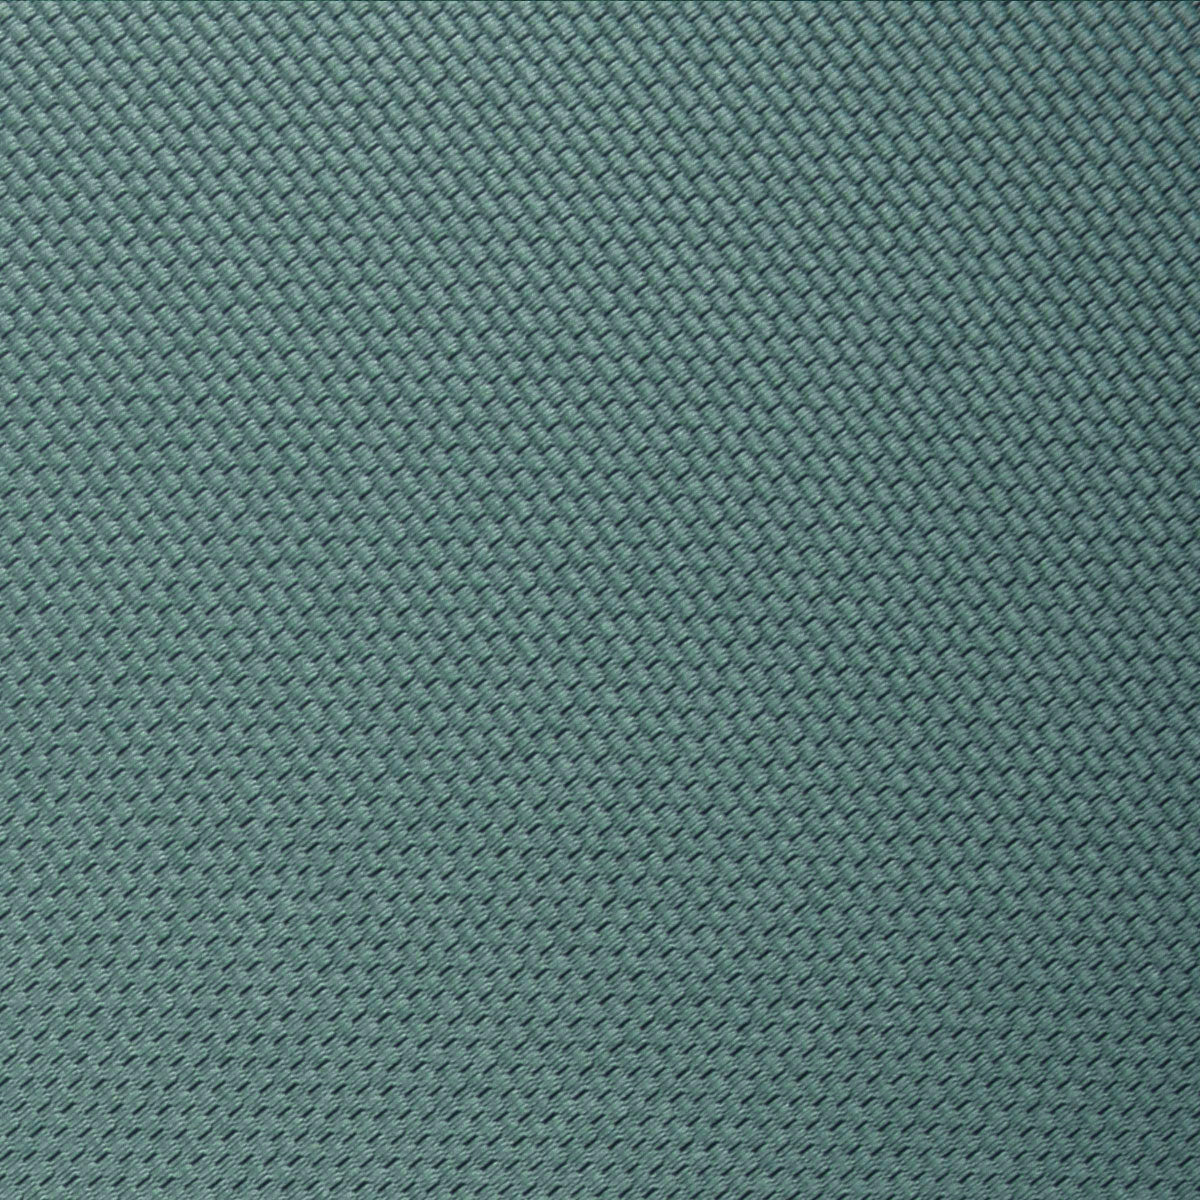 Dusty Teal Blue Weave Self Bow Tie Fabric